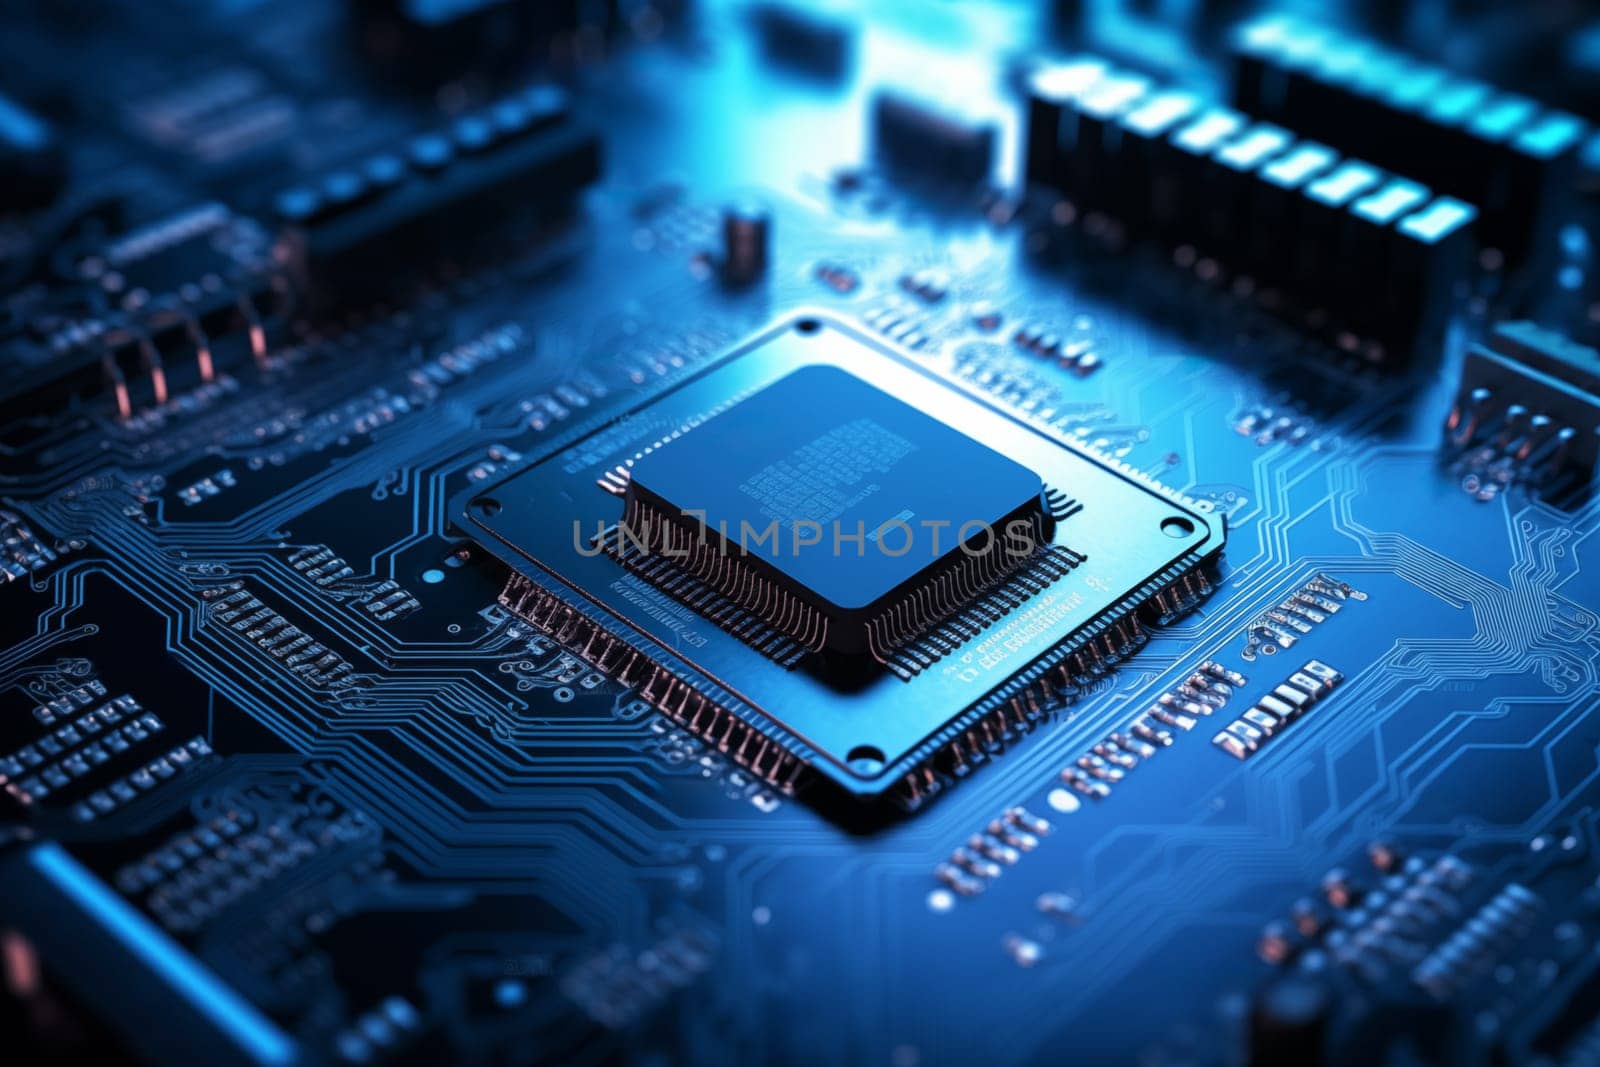 Close-up of a blue circuit board with a central microchip processor by dimol